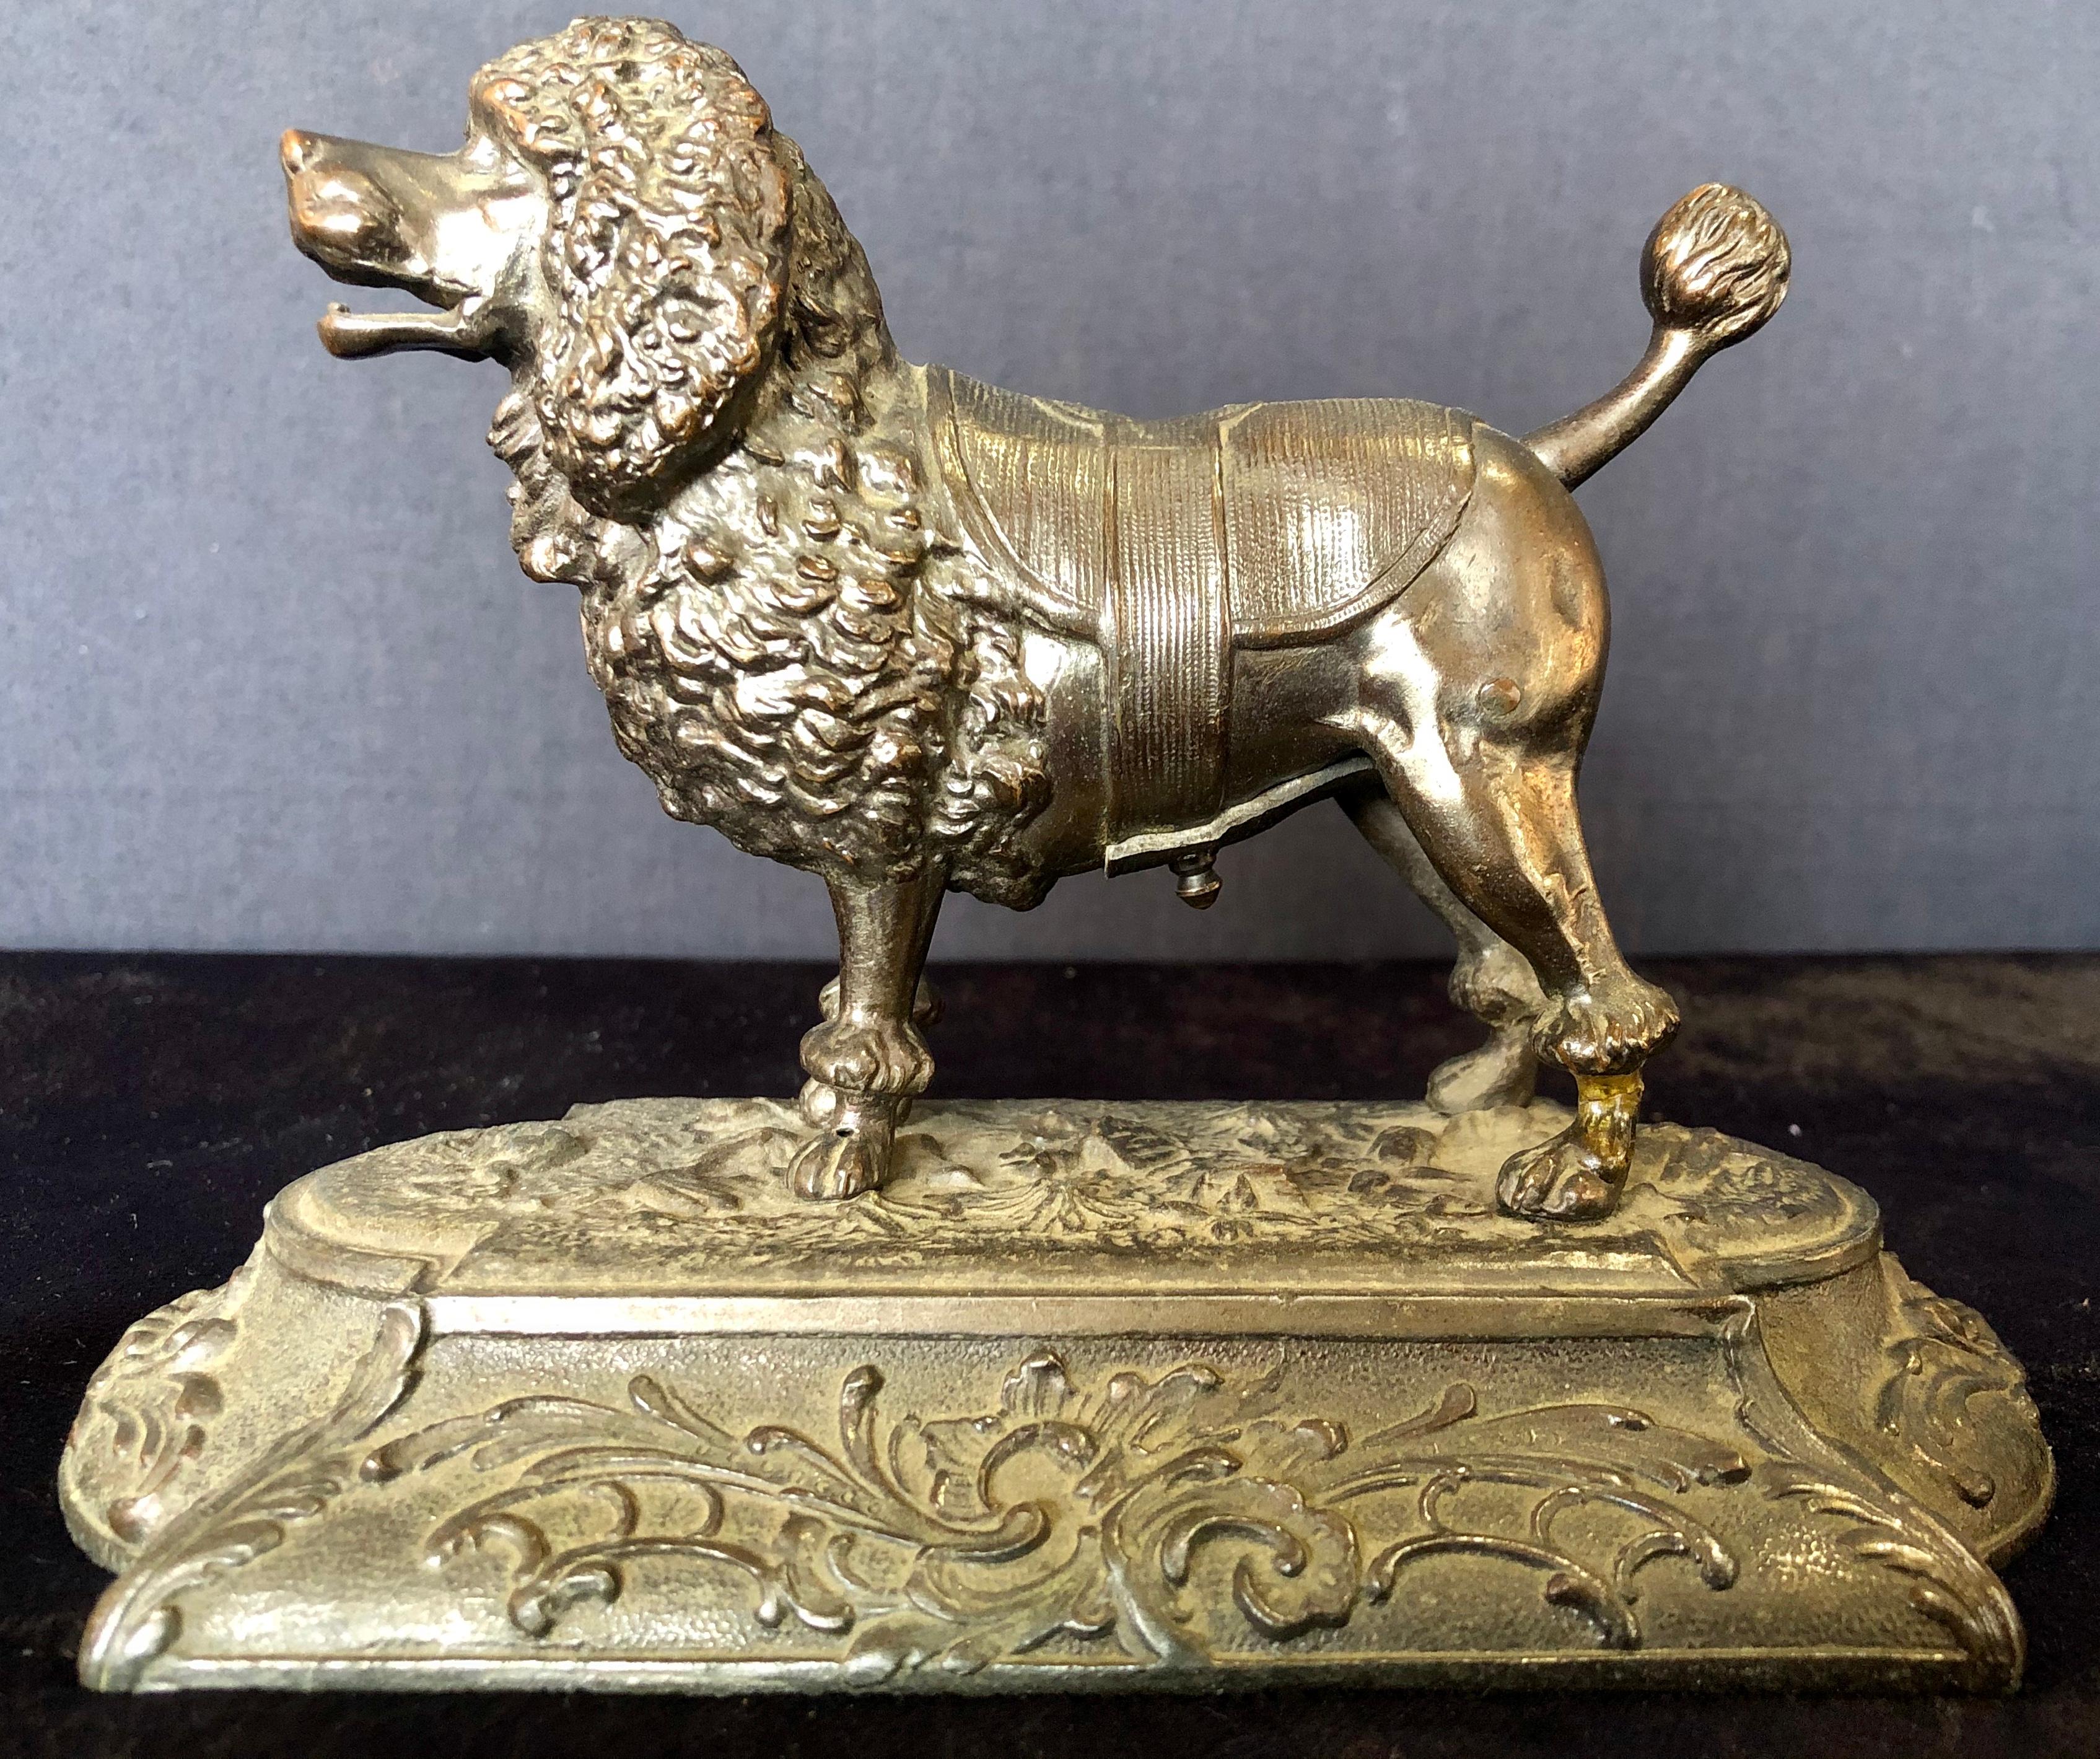 Antique metal poodle dog cigar cutter. Rare antique mechanical poodle dog, cigar cutter. It's a mechanized cigar cutter. Just insert the tip of a small cigar or cheroot, then you push down on his tail and an internal mechanism cuts the tip from your